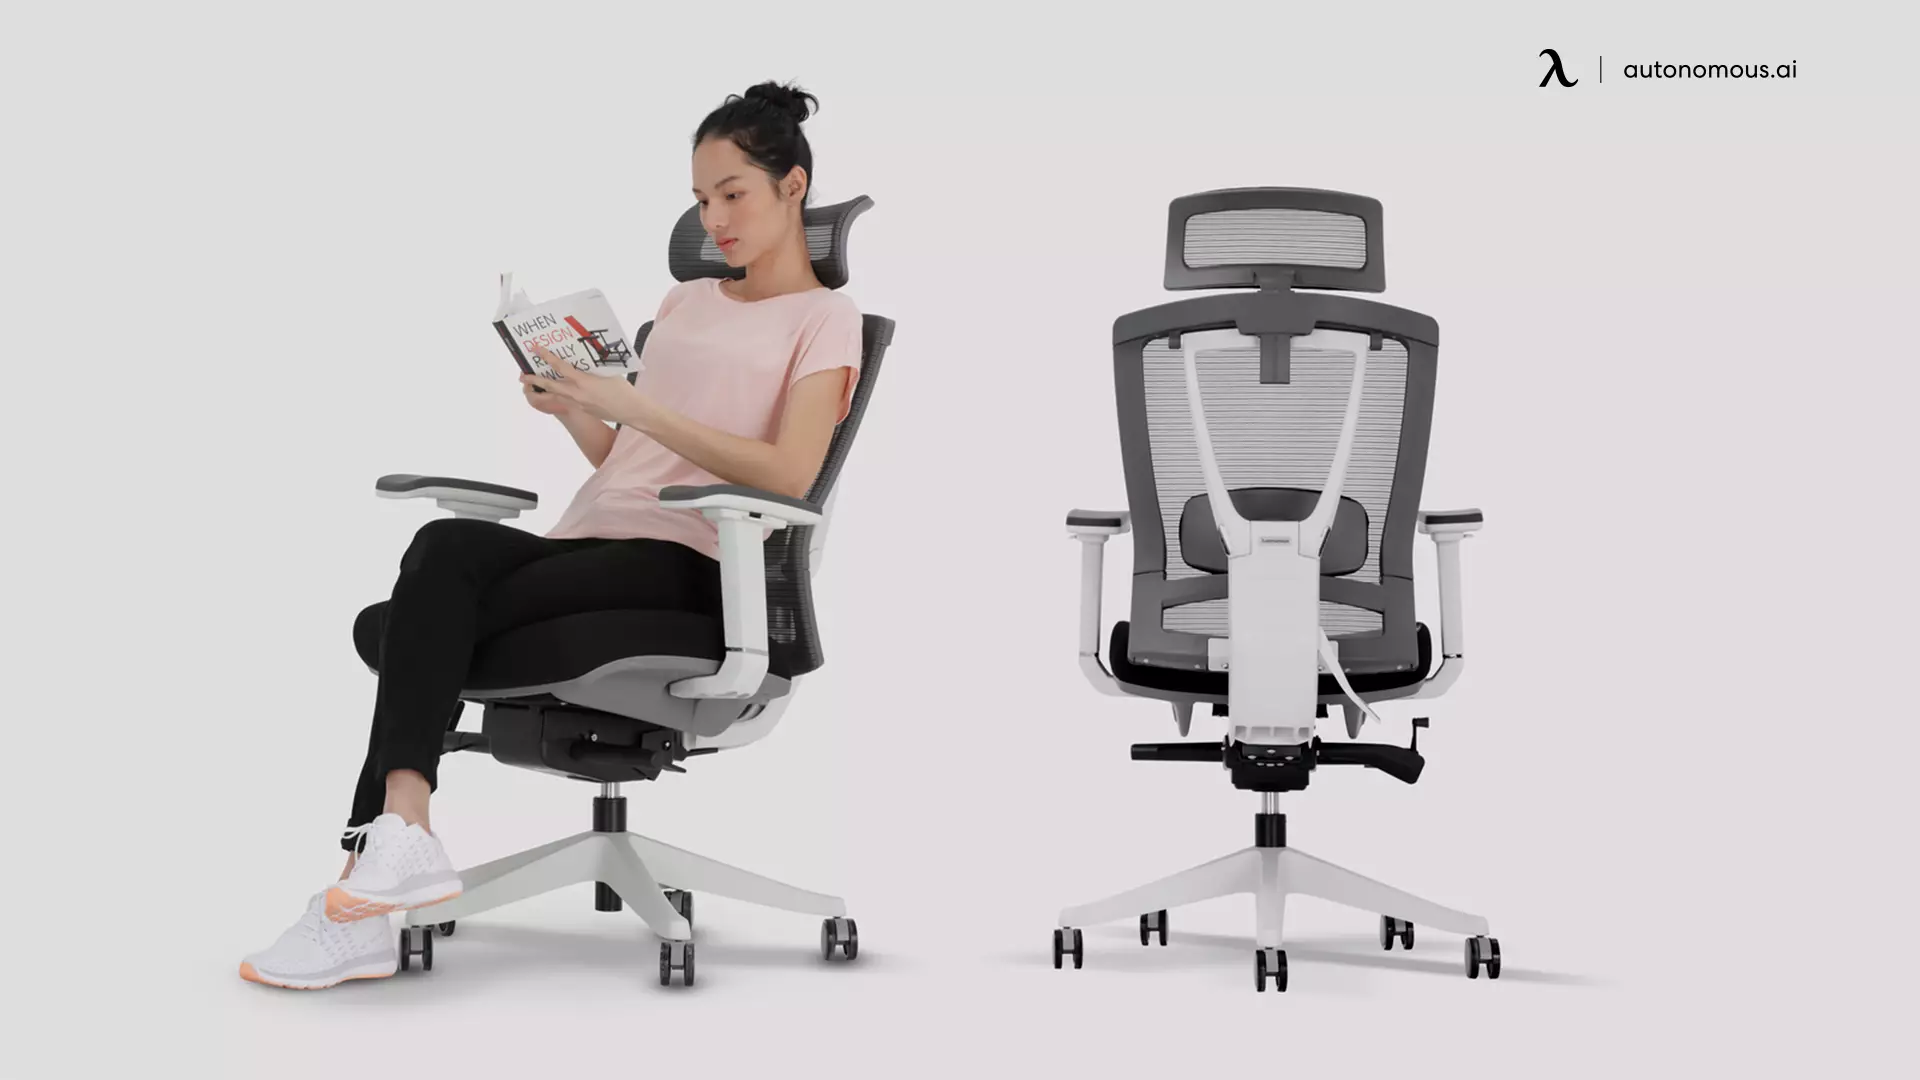 Is an Ergonomically Designed Chair a Crucial Consideration?